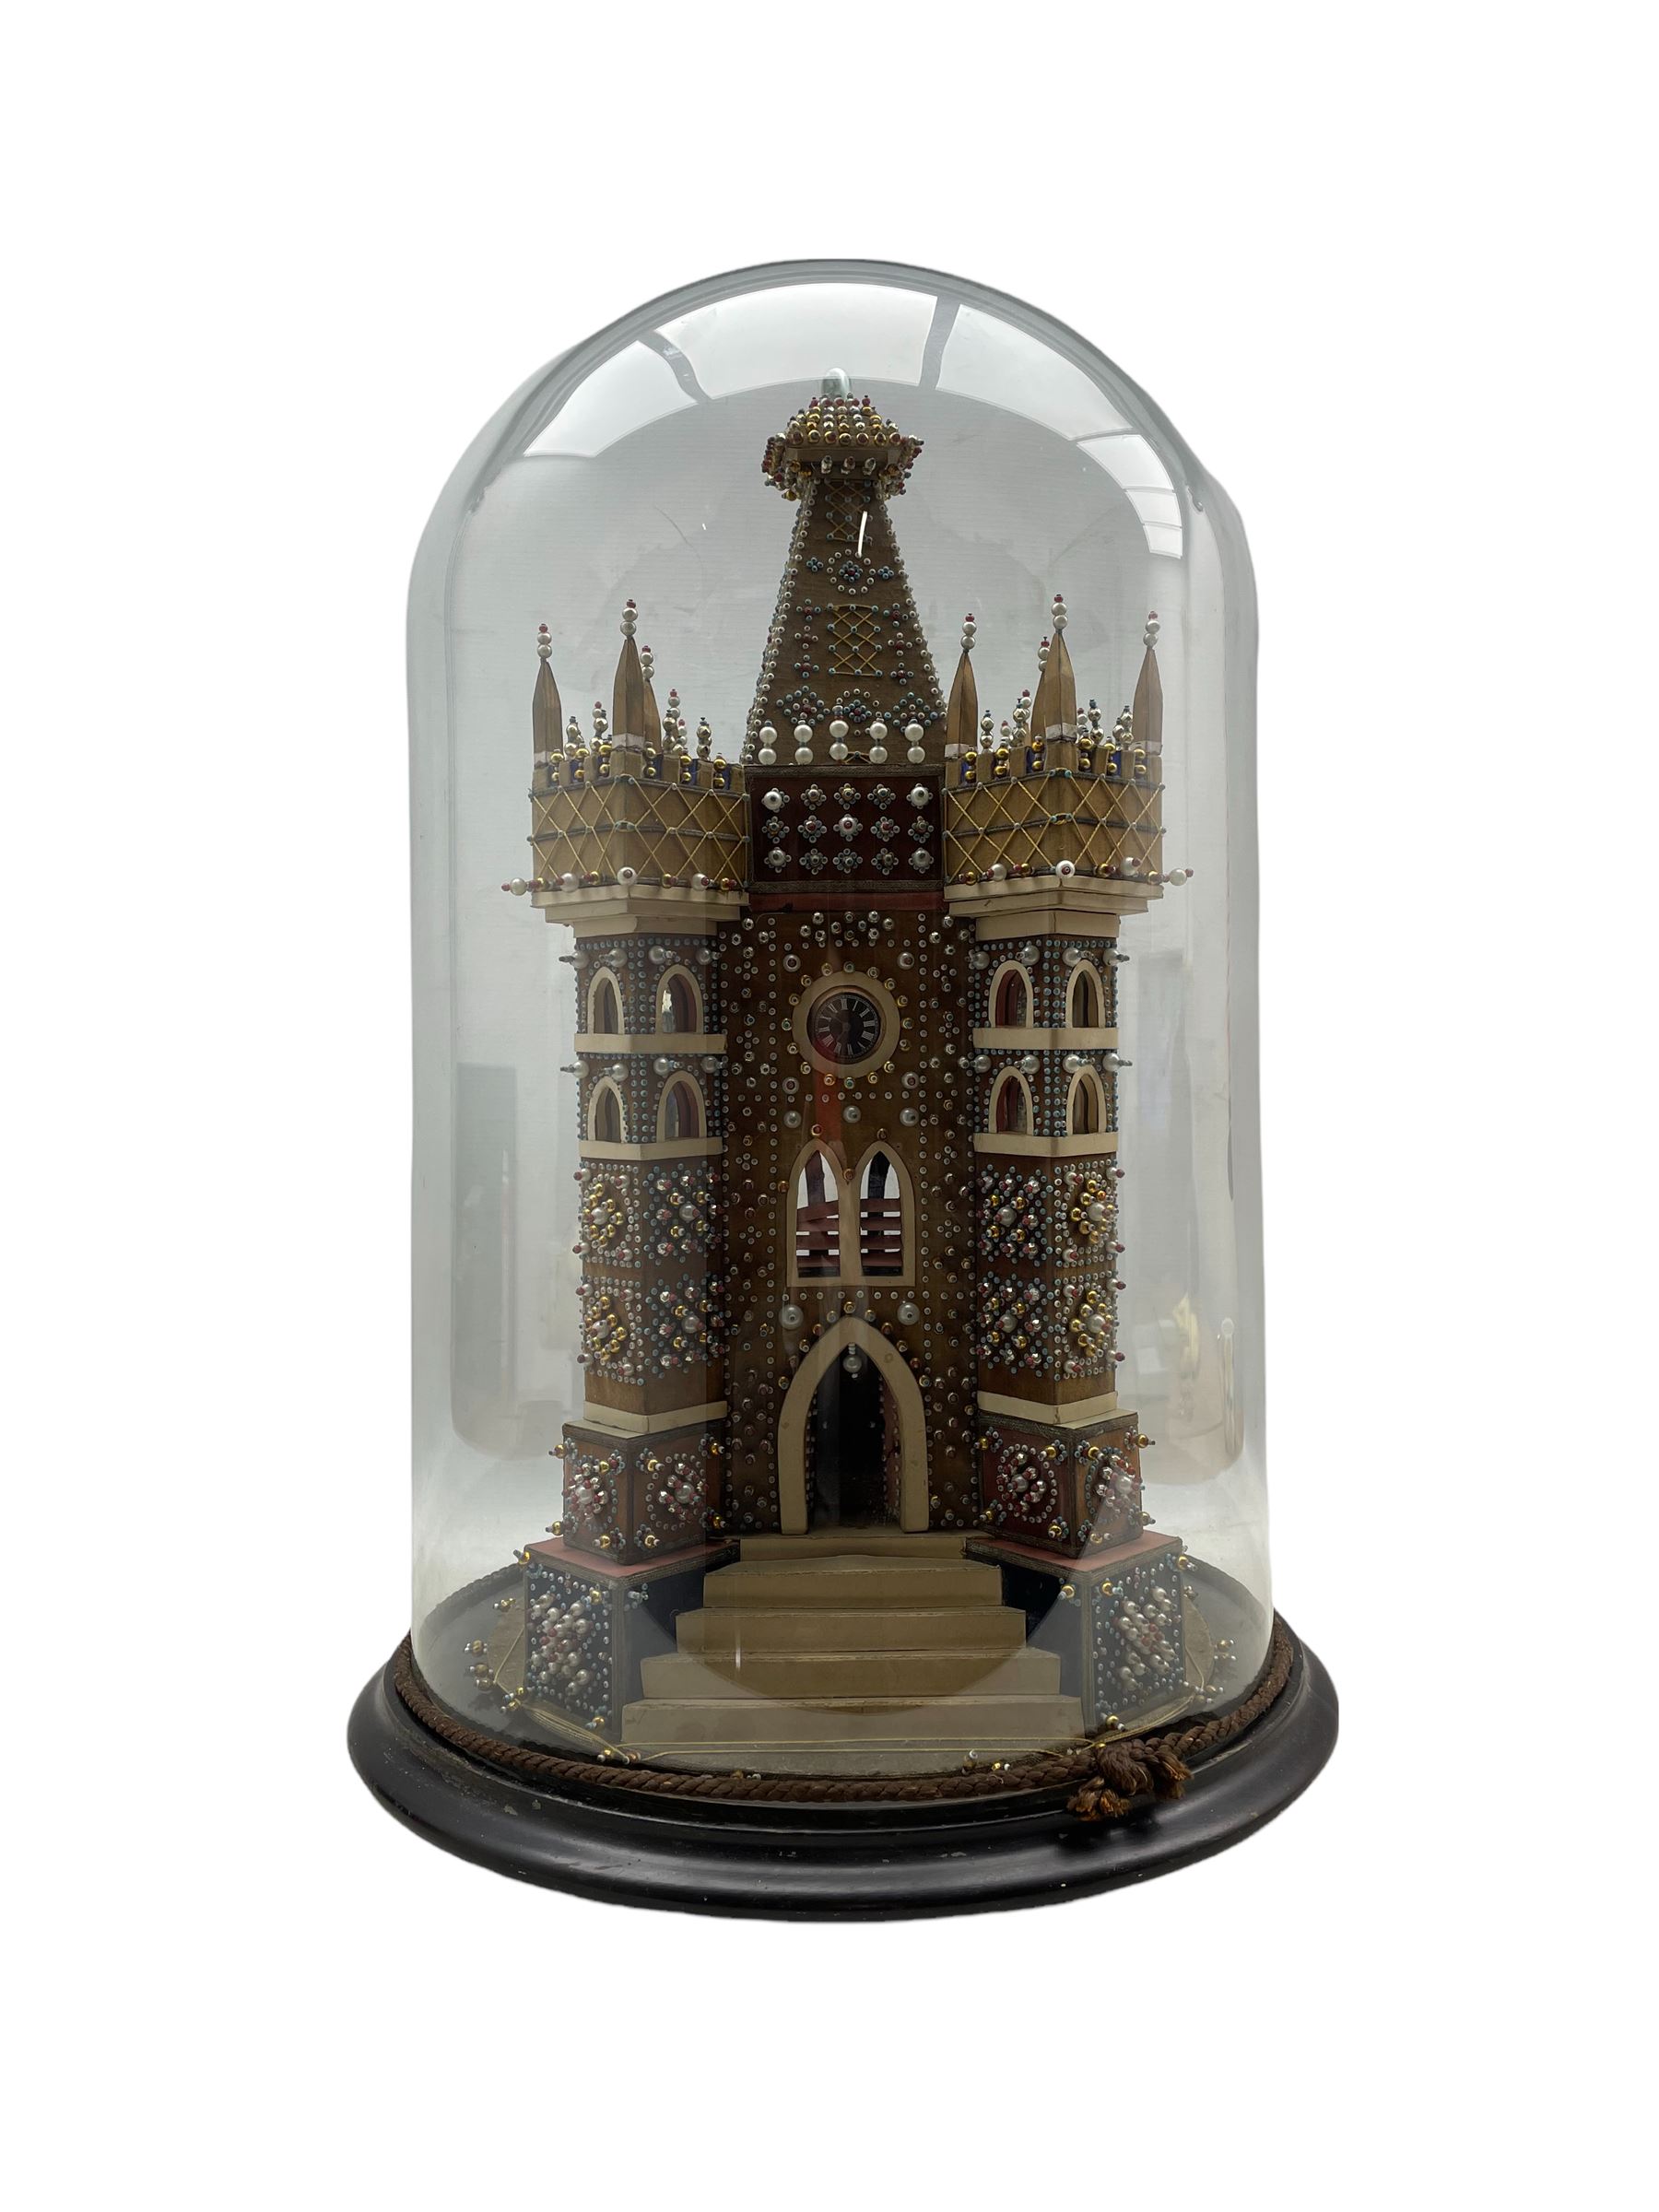 Edwardian velvet and beadwork model of a Church tower dated 1910 - Image 5 of 5